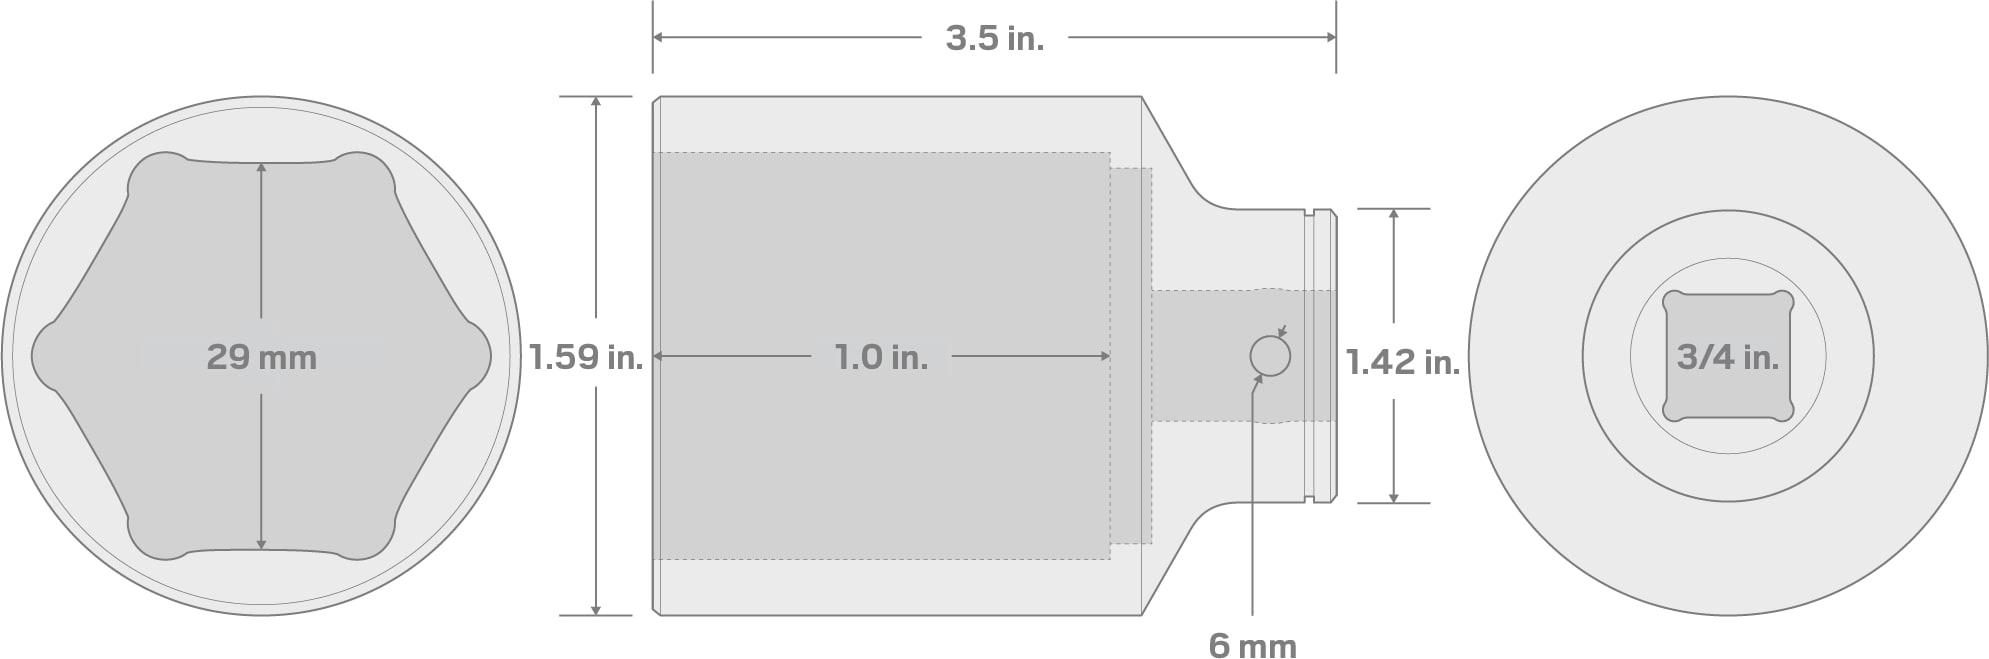 Specs for 3/4 Inch Drive x 29 mm Deep 6-Point Socket